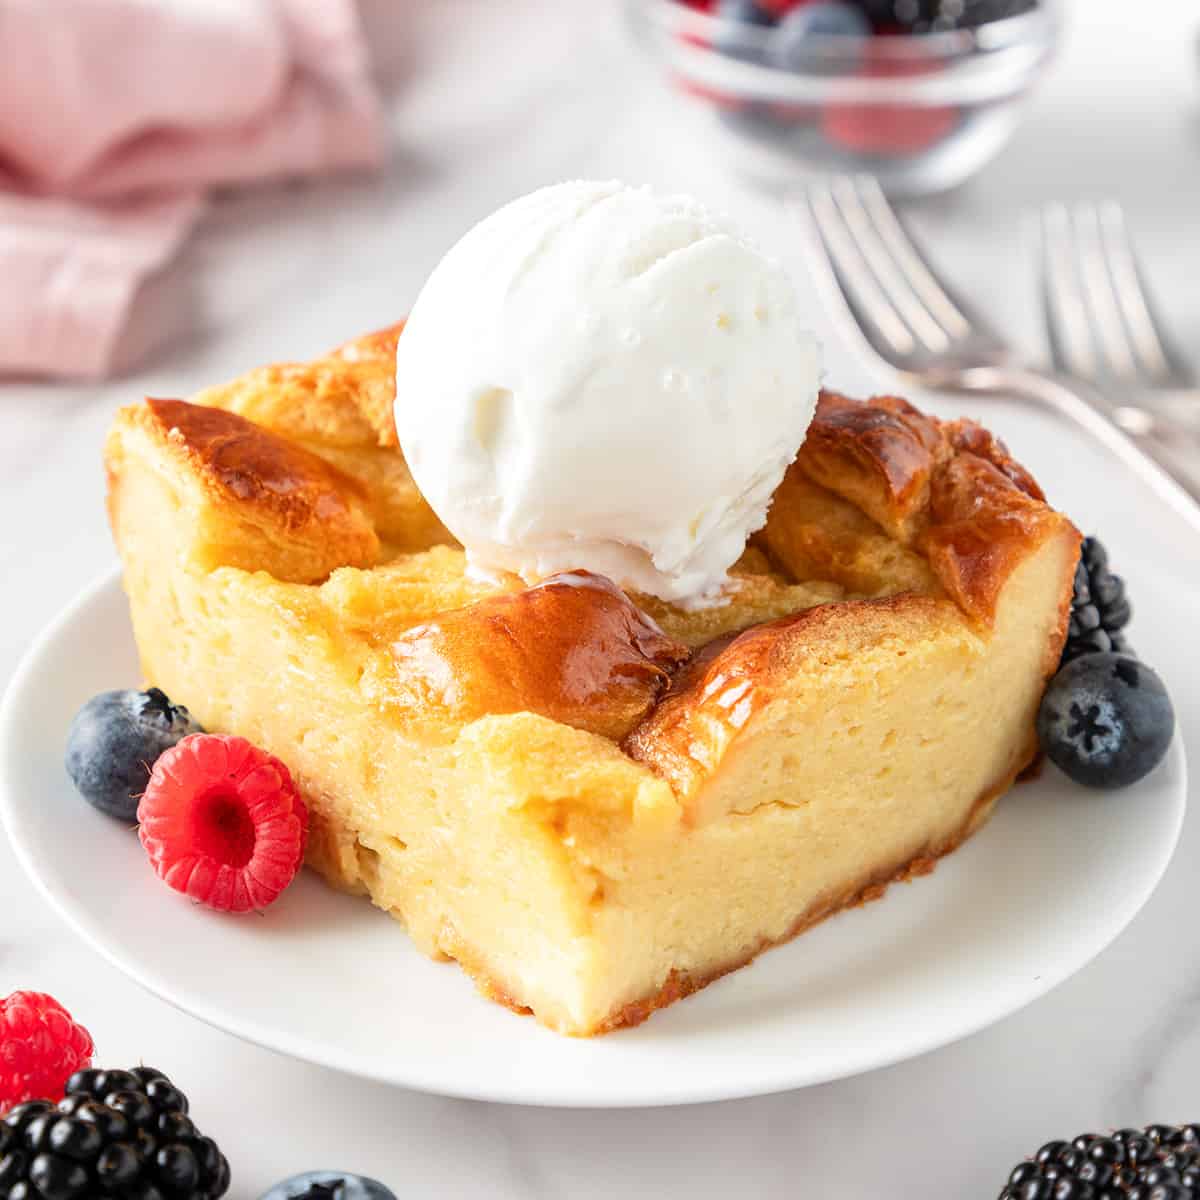 a slice of bread pudding on a plate topped with vanilla ice cream, garnished with berries